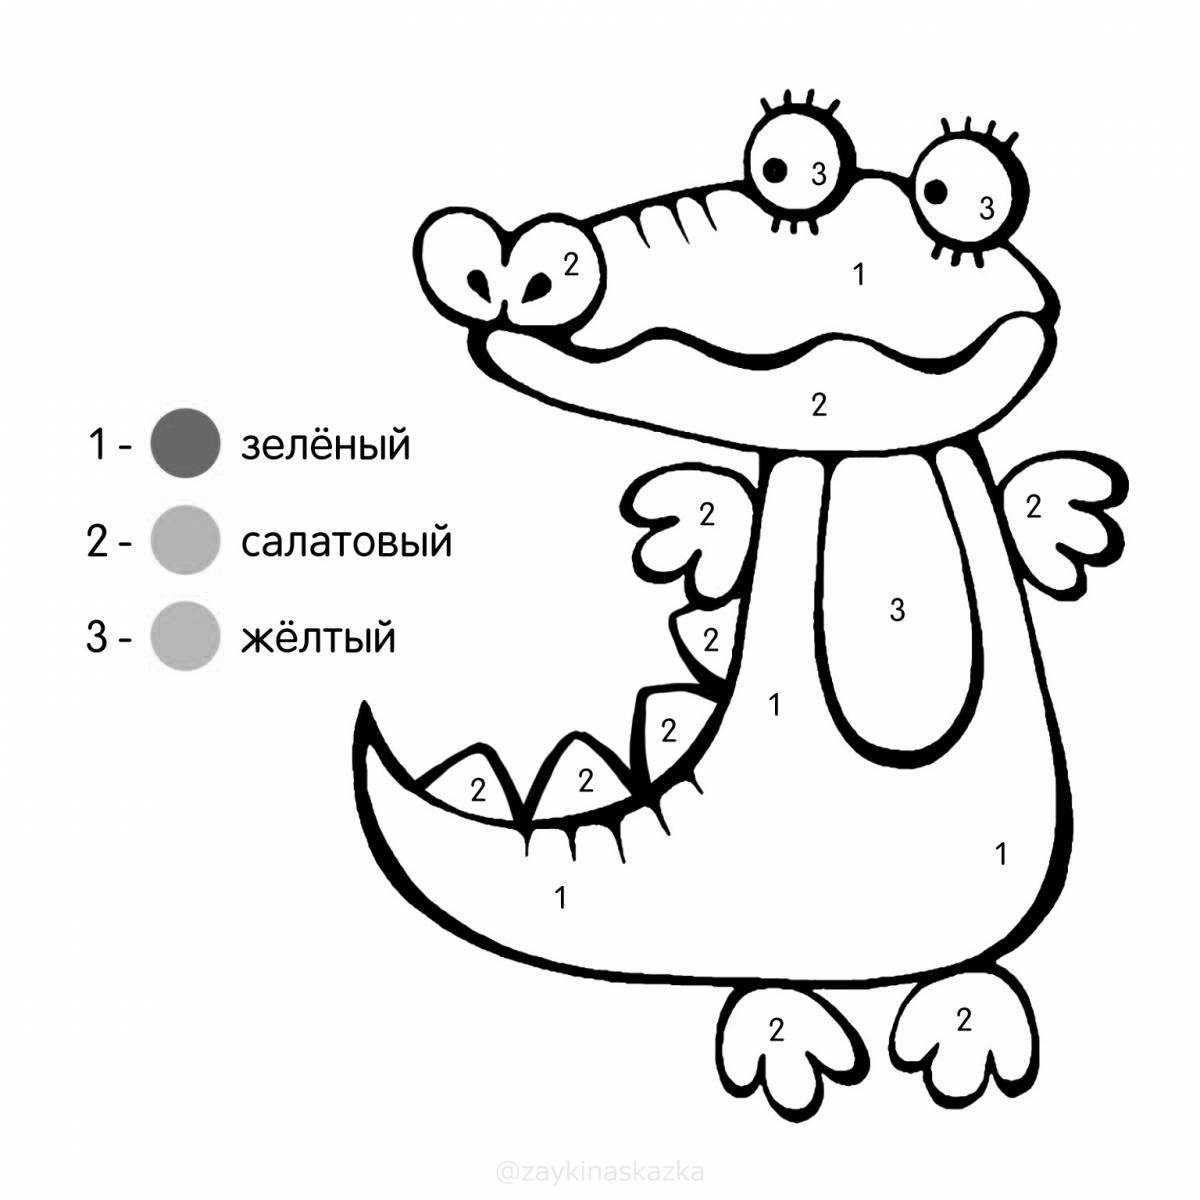 Crazy Crocodile Coloring Page for 3-4 year olds